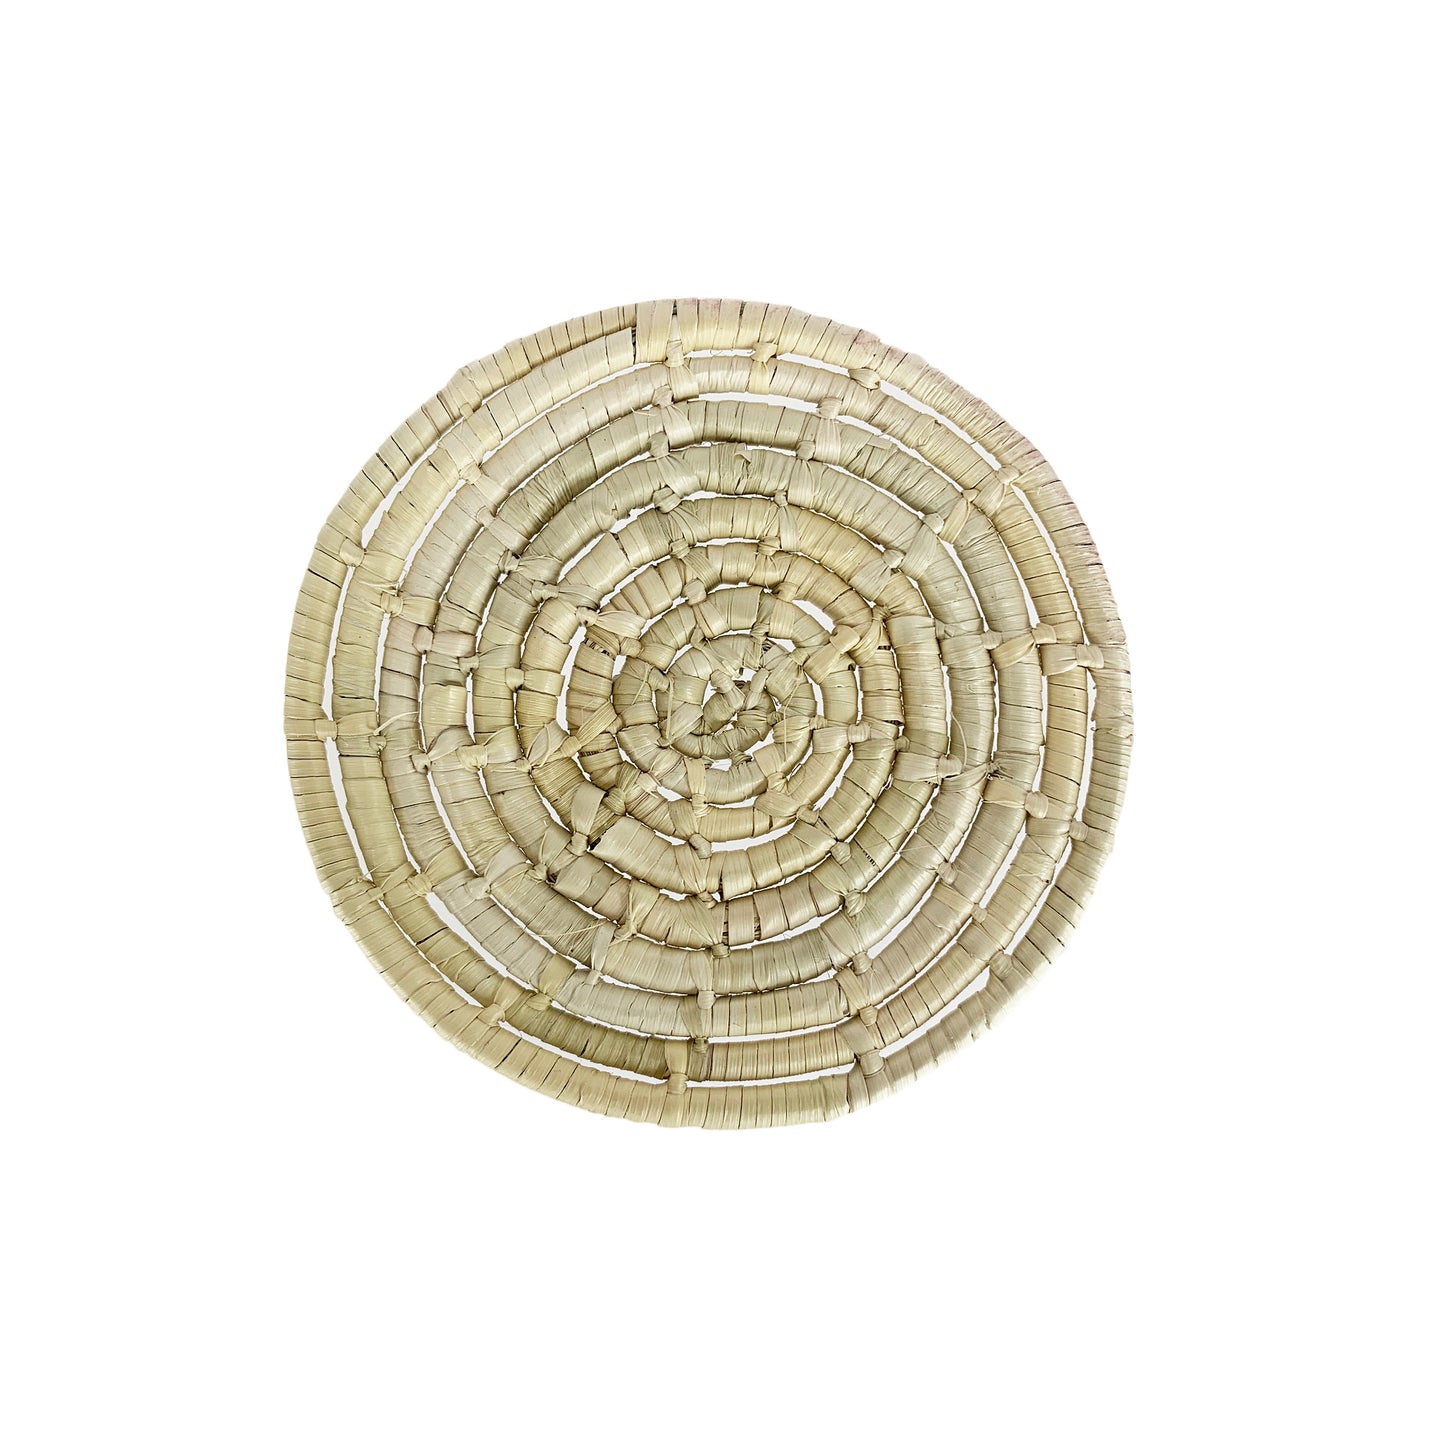 Hand-woven Palm Fiber coasters from Mexico (Sold Individually)